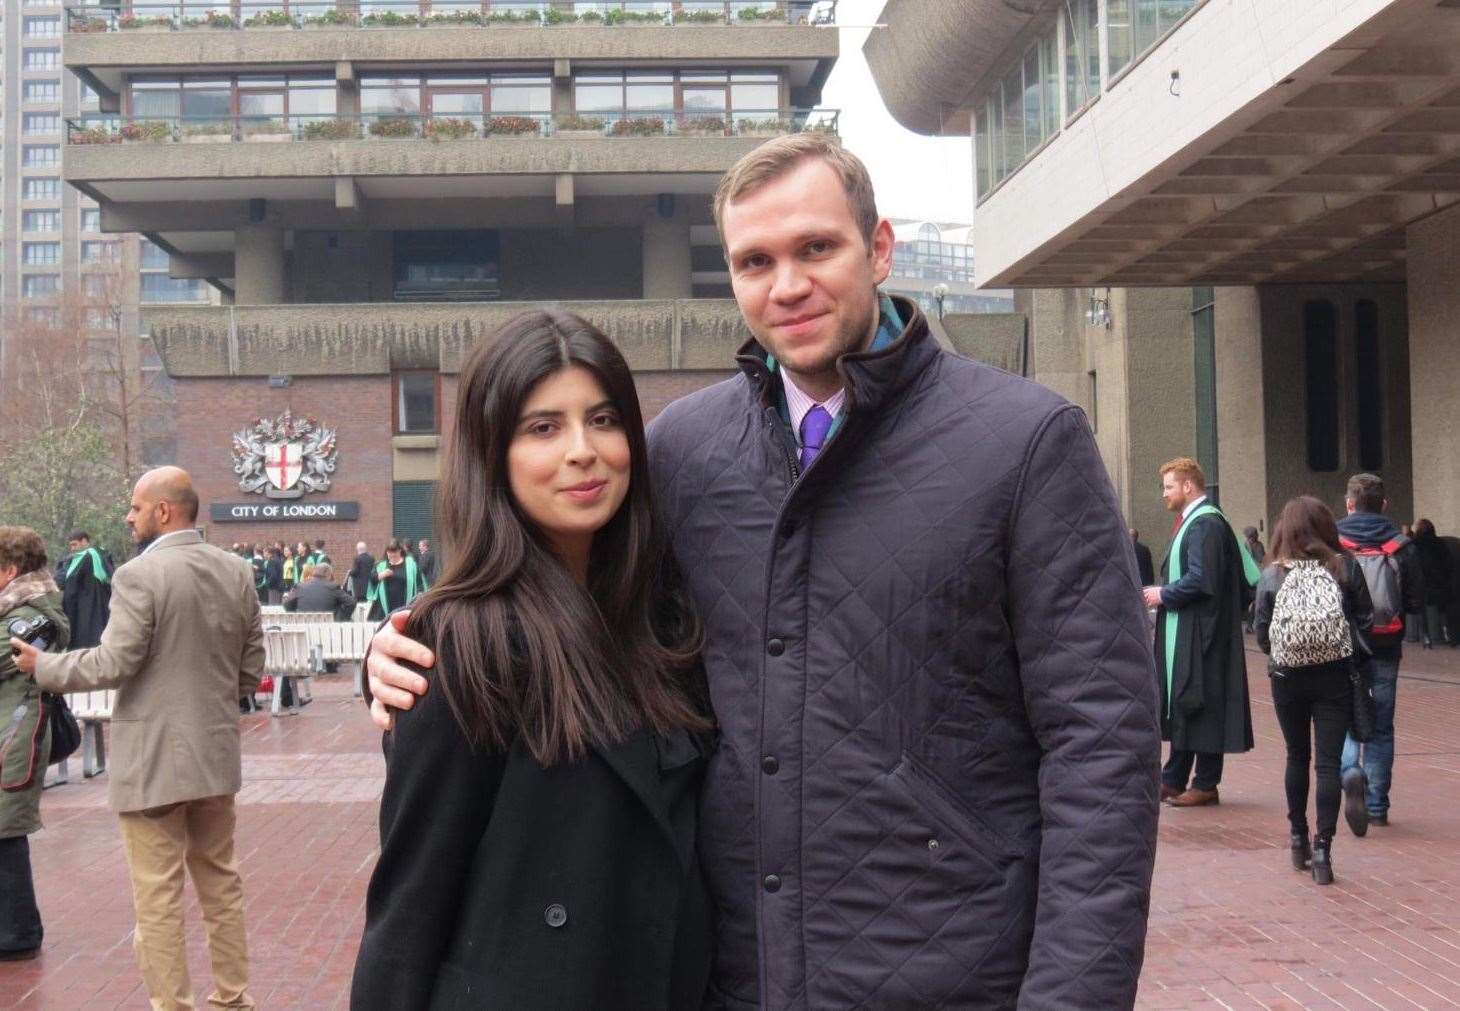 Matthew Hedges, pictured with his wife Daniela Tejada, was jailed for life in the UAE on a spying charge but pardoned by president Sheikh Khalifa bin Zayed Al Nahyan days later (Family Handout/PA)